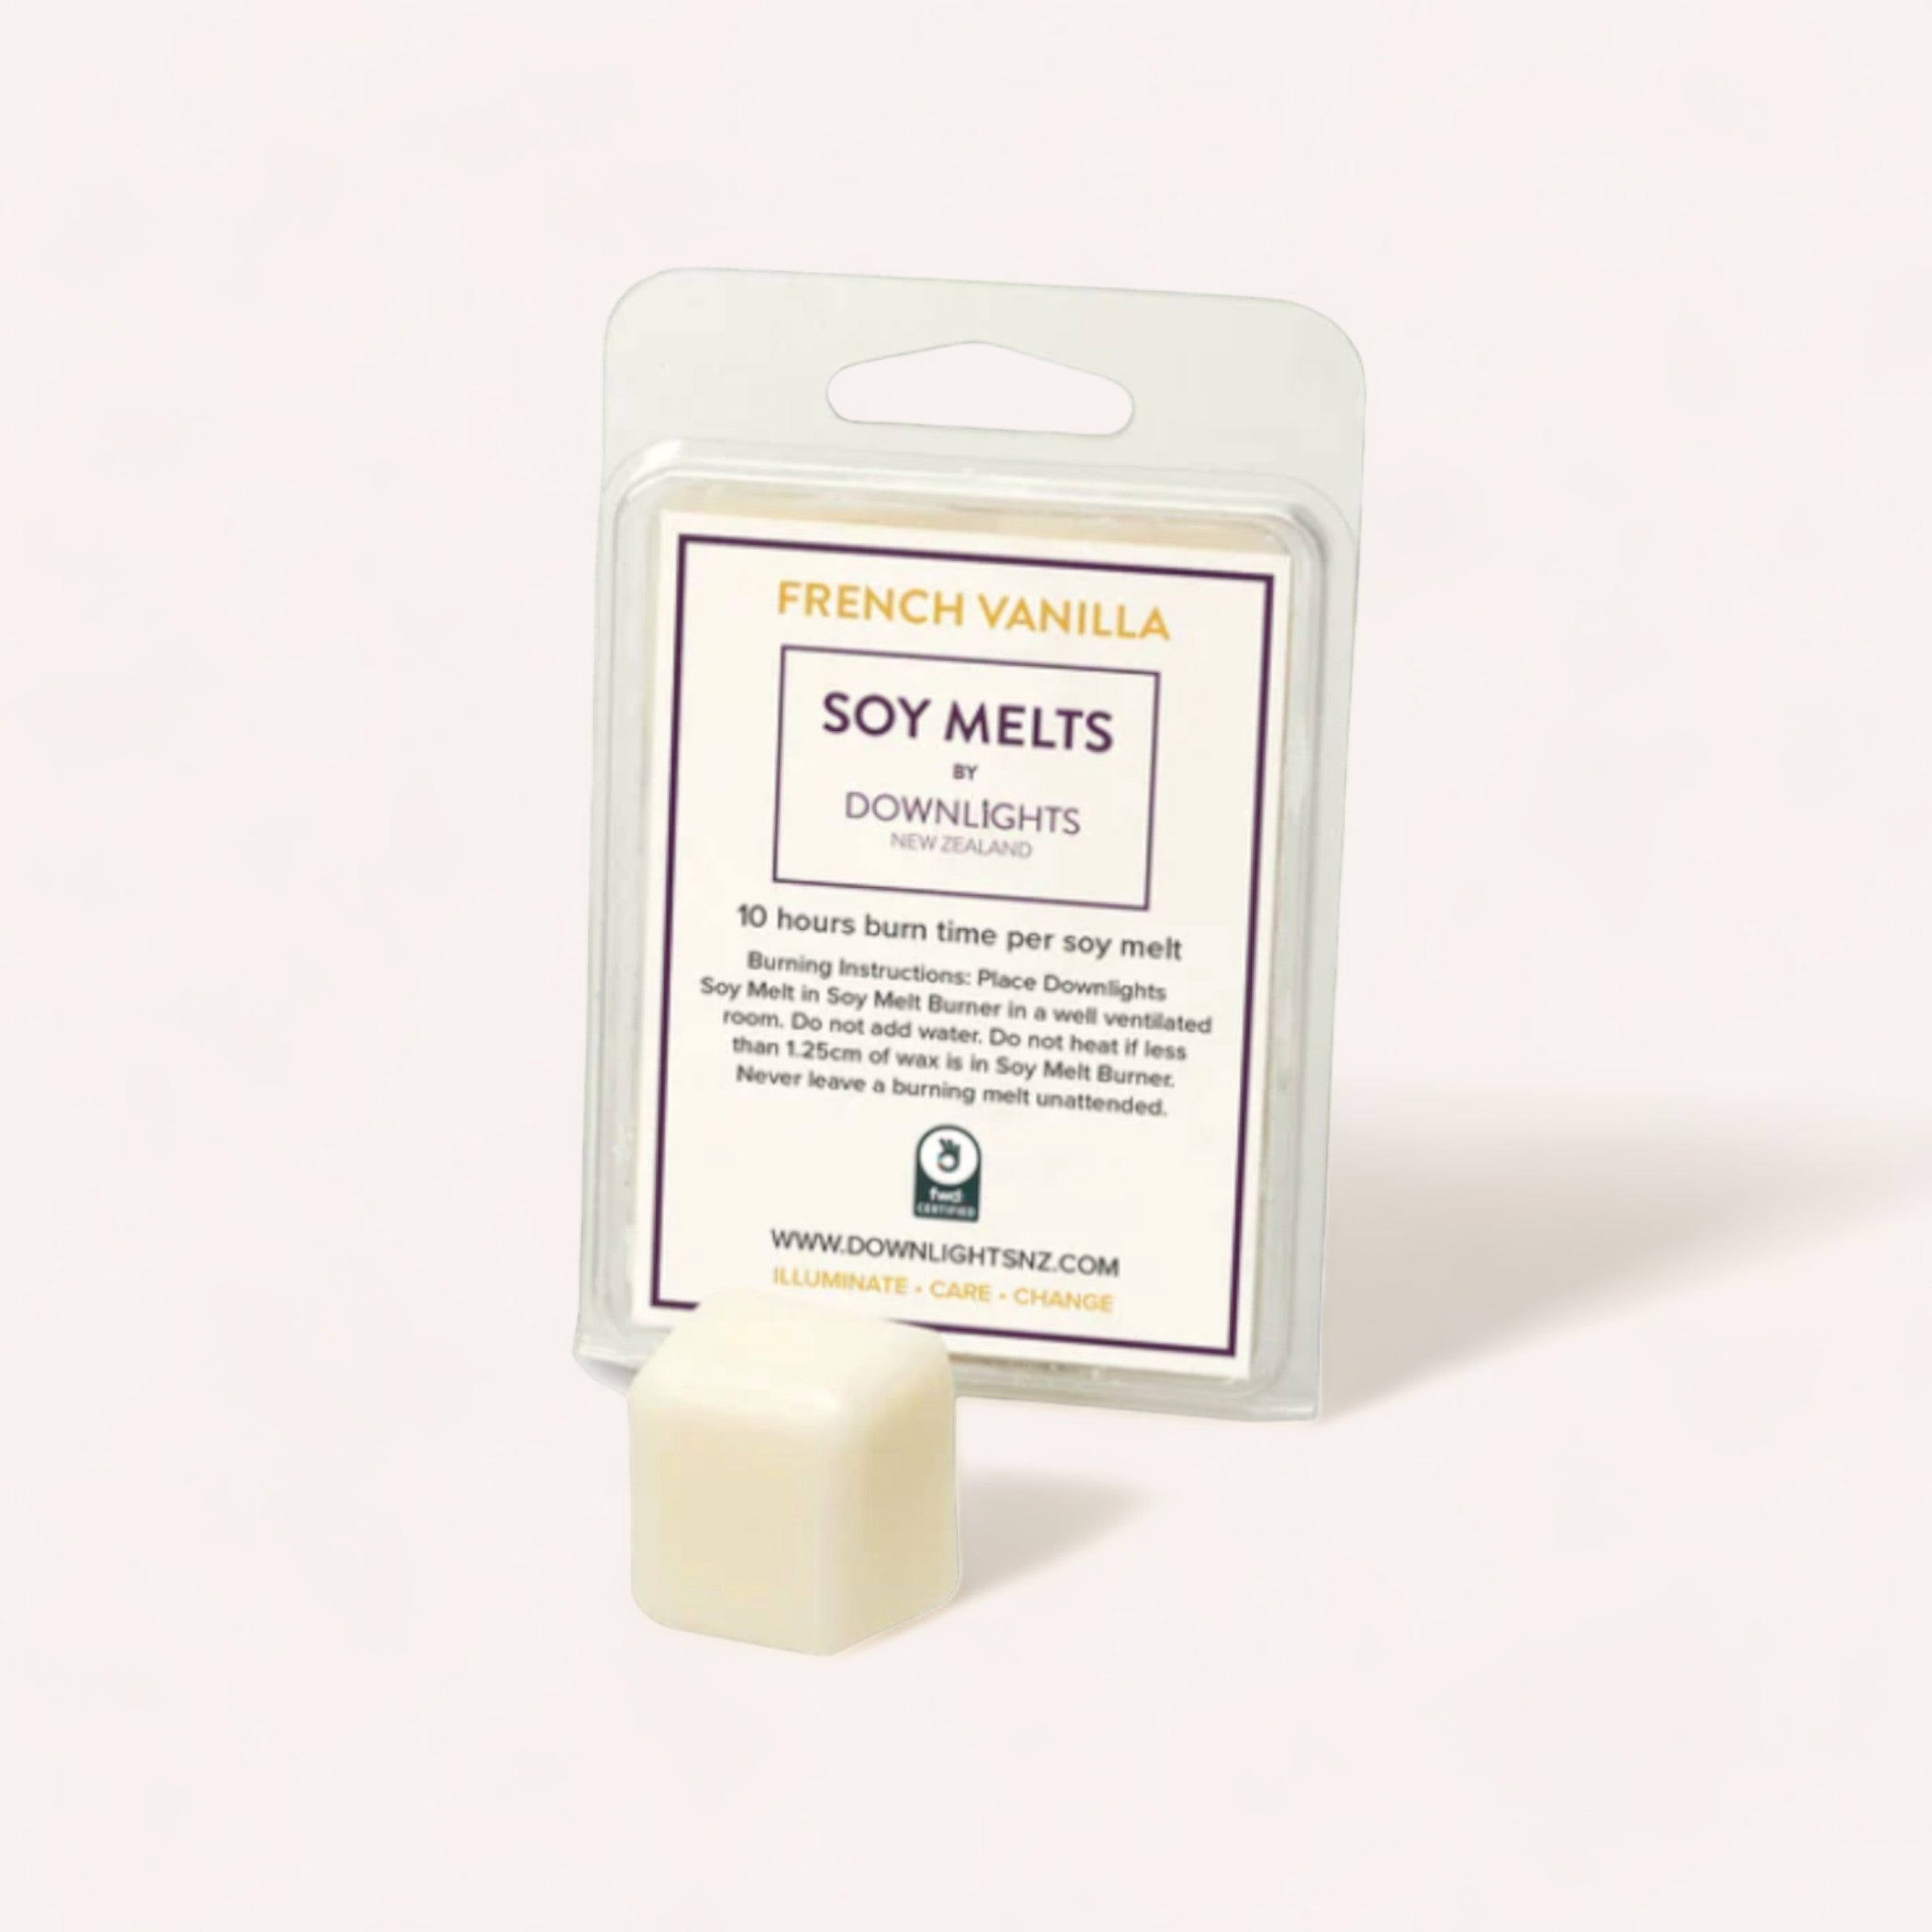 A package of French Vanilla Soy Melts by Downlights with a single cube placed in front of it on a light background, highlighting an eco-friendly soy wax melt product.